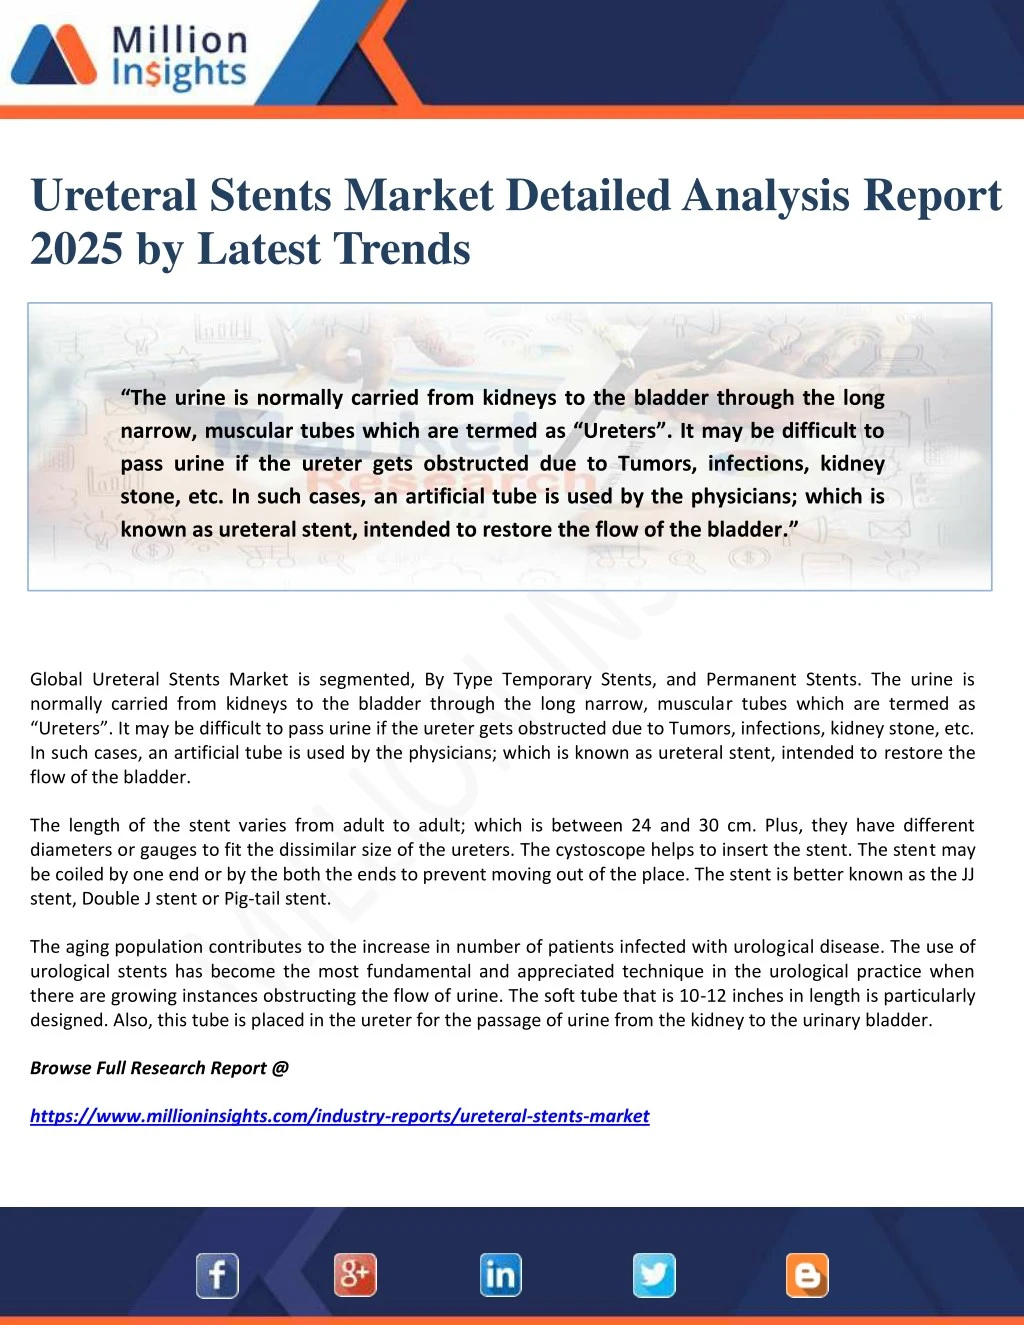 ureteral stents market detailed analysis report